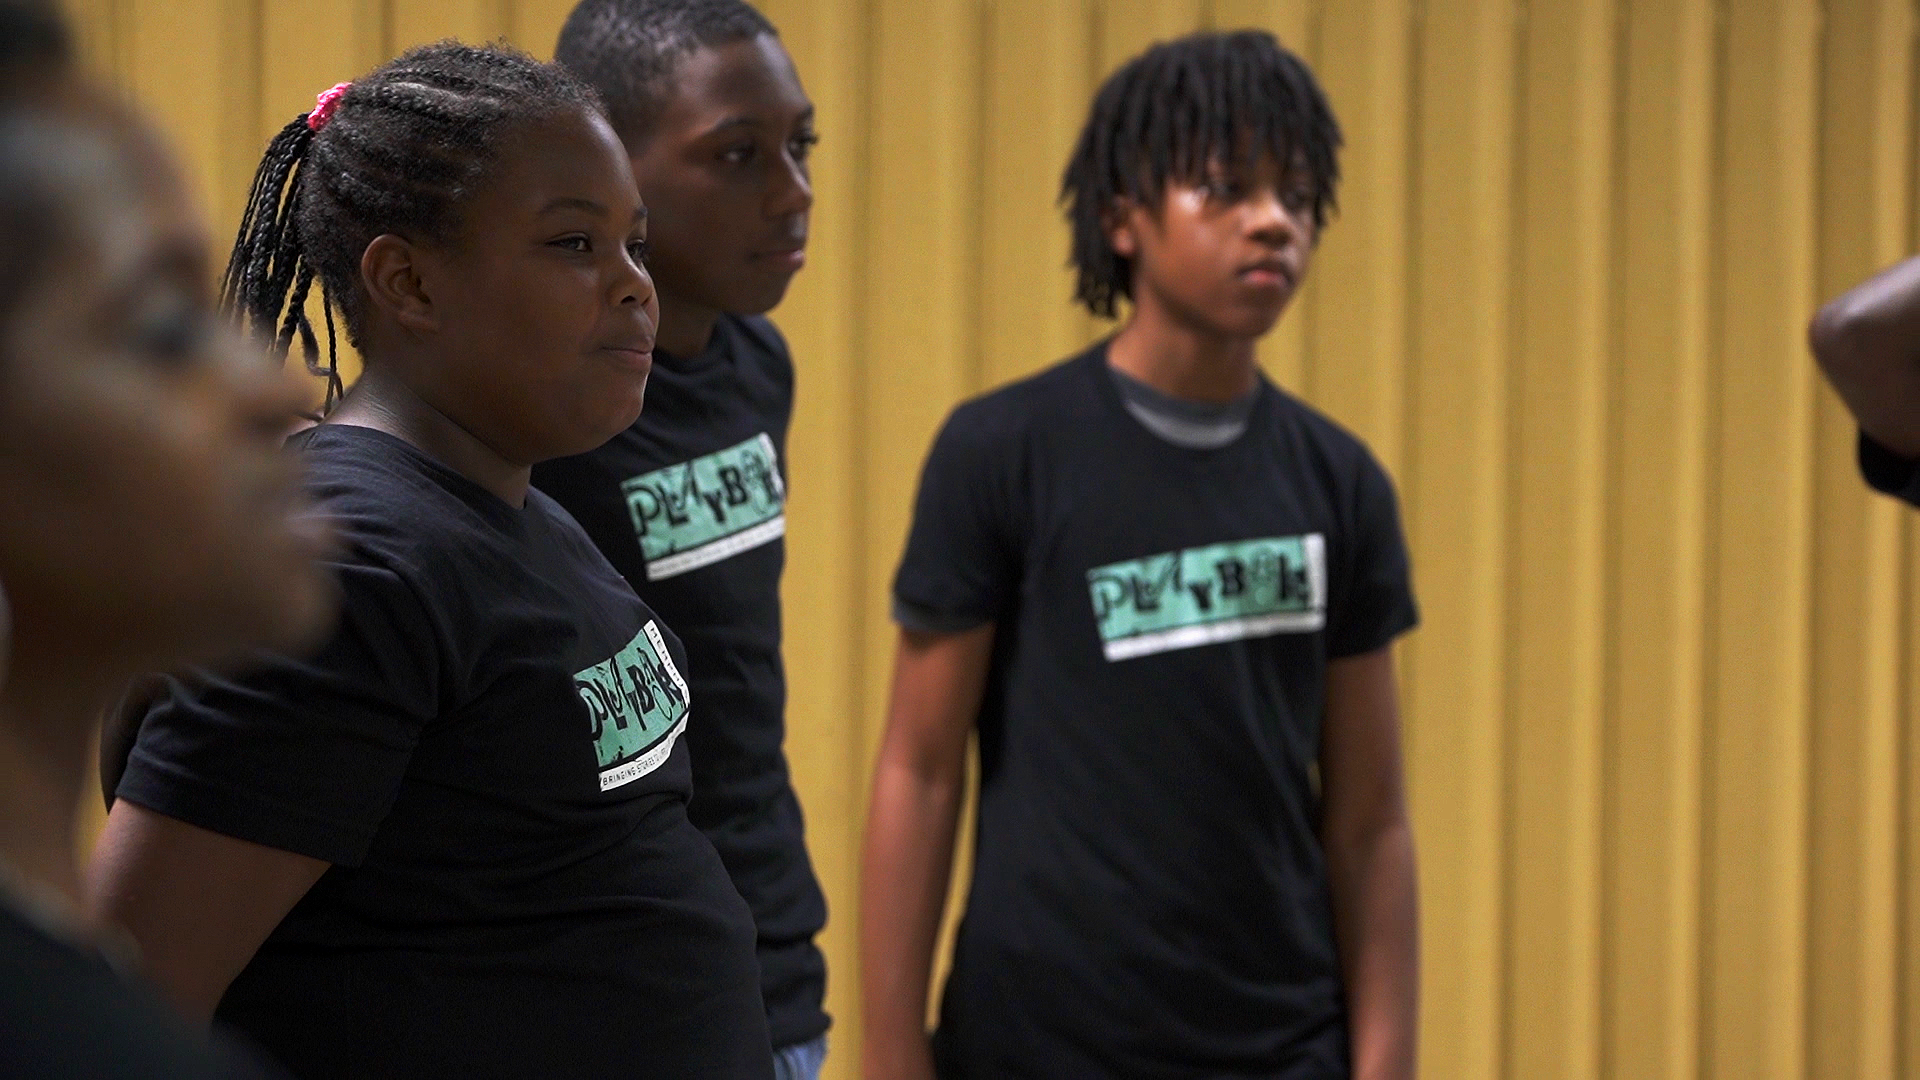 Members of the Playback Memphis Youth Ensemble gave their first performance at the second annual Frayser Matters event. (Playback Memphis)